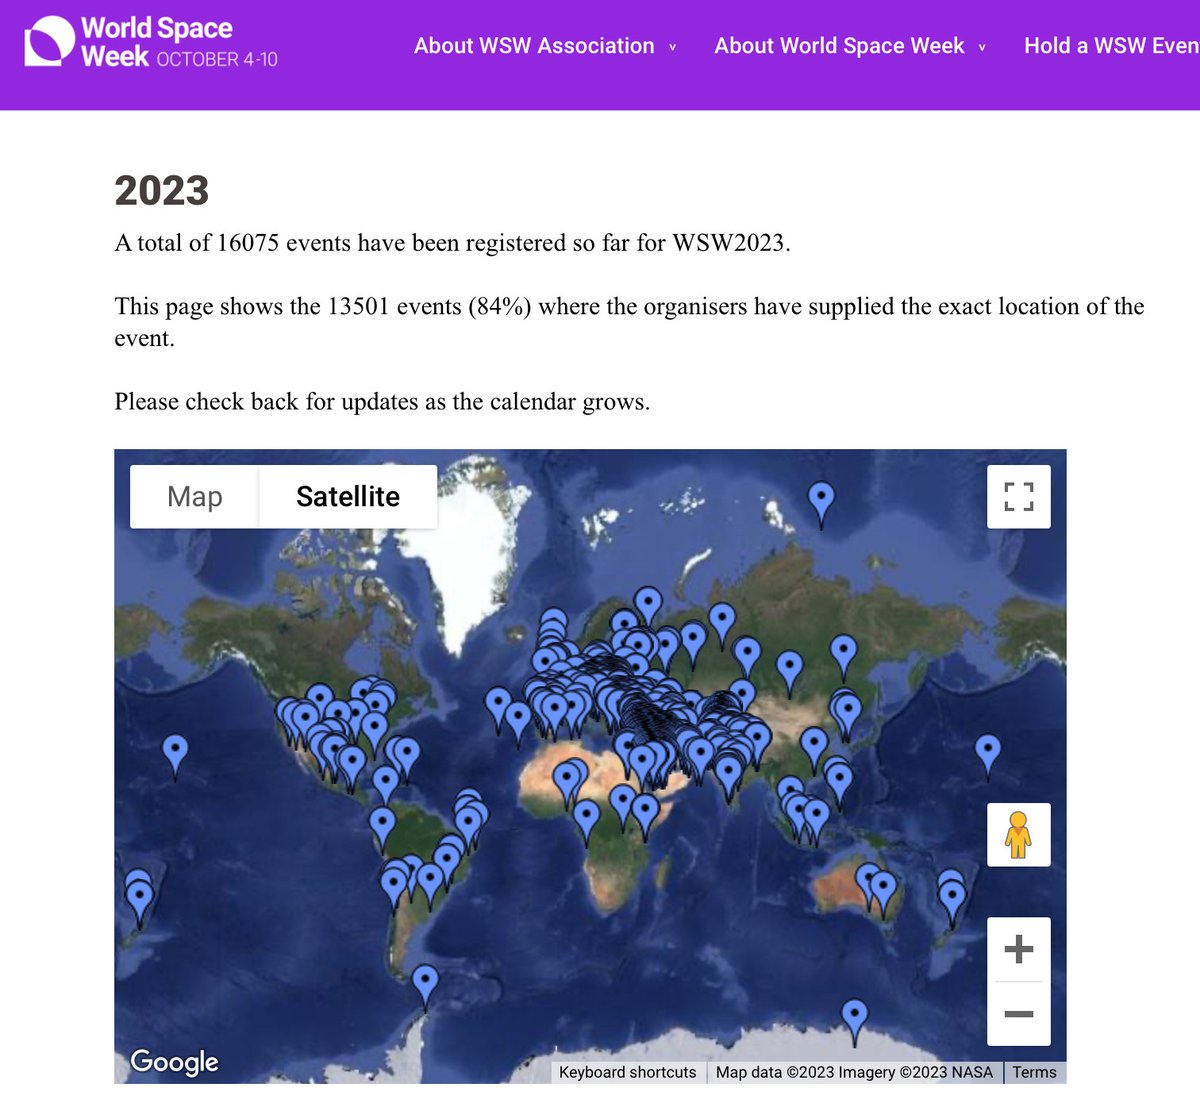 Record Alert! Over 16,000 #WSW2023 events reported globally🌍 Kudos to the space community for such a stellar milestone.
🌐83 countries joined the celebration!
🔍Event counts are yet to be audited for duplicates.
Thanks to all for making #WorldSpaceWeek a cosmos of inspiration!